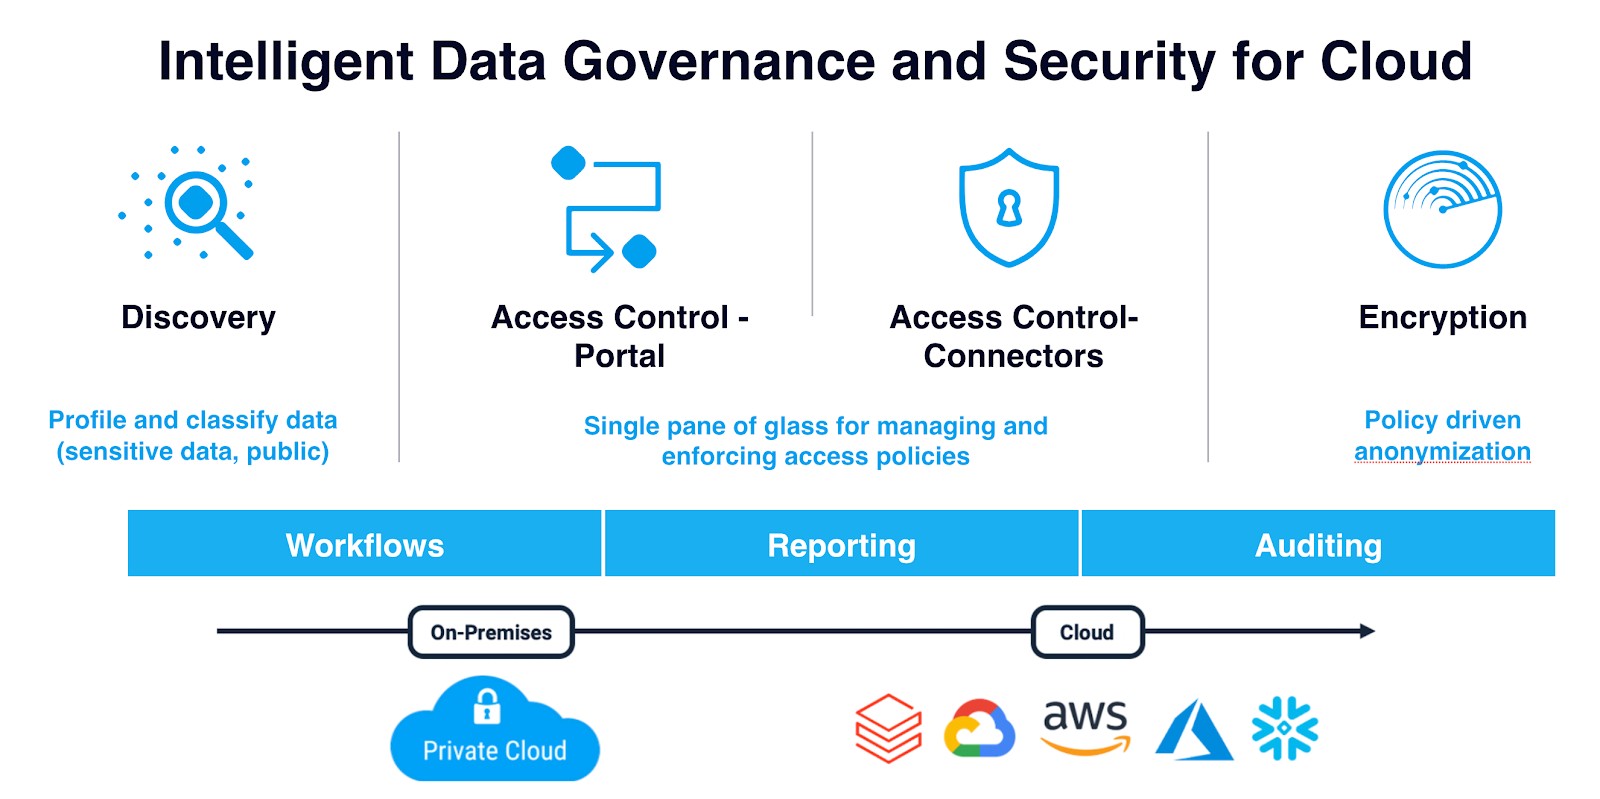 Intelligent Data Governance and Security for Cloud